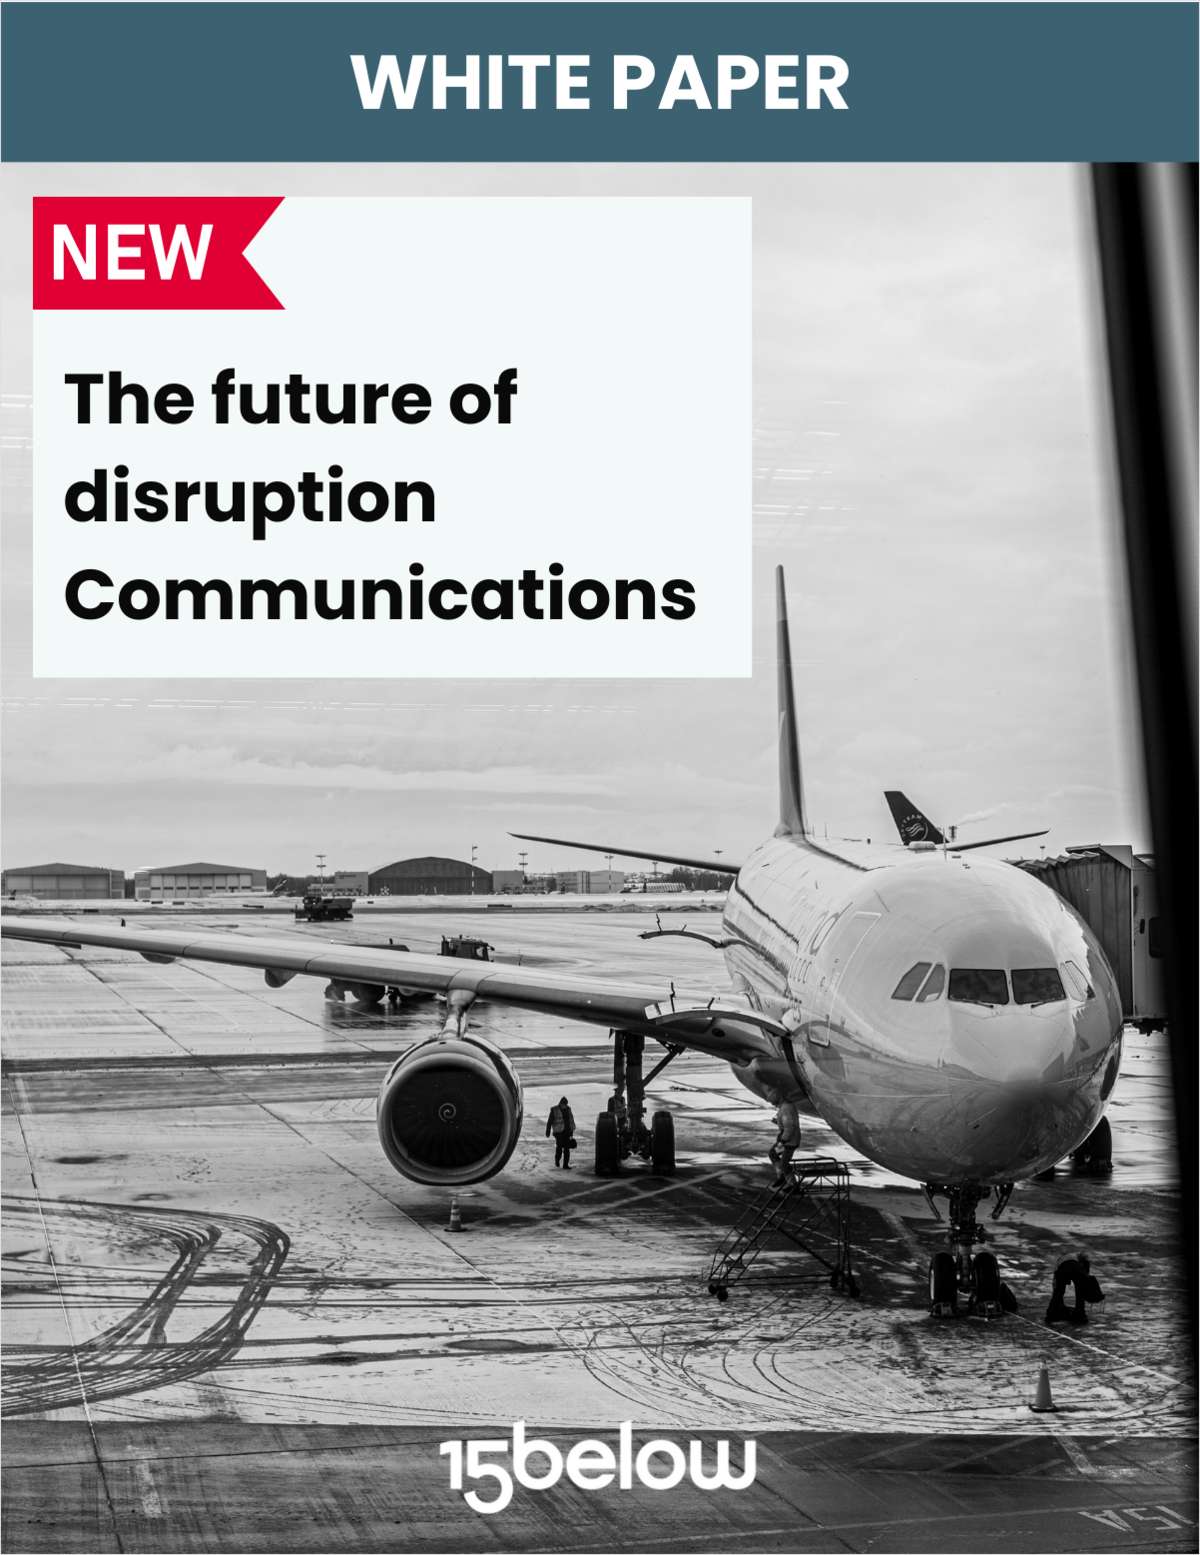 The future of airline disruption communications